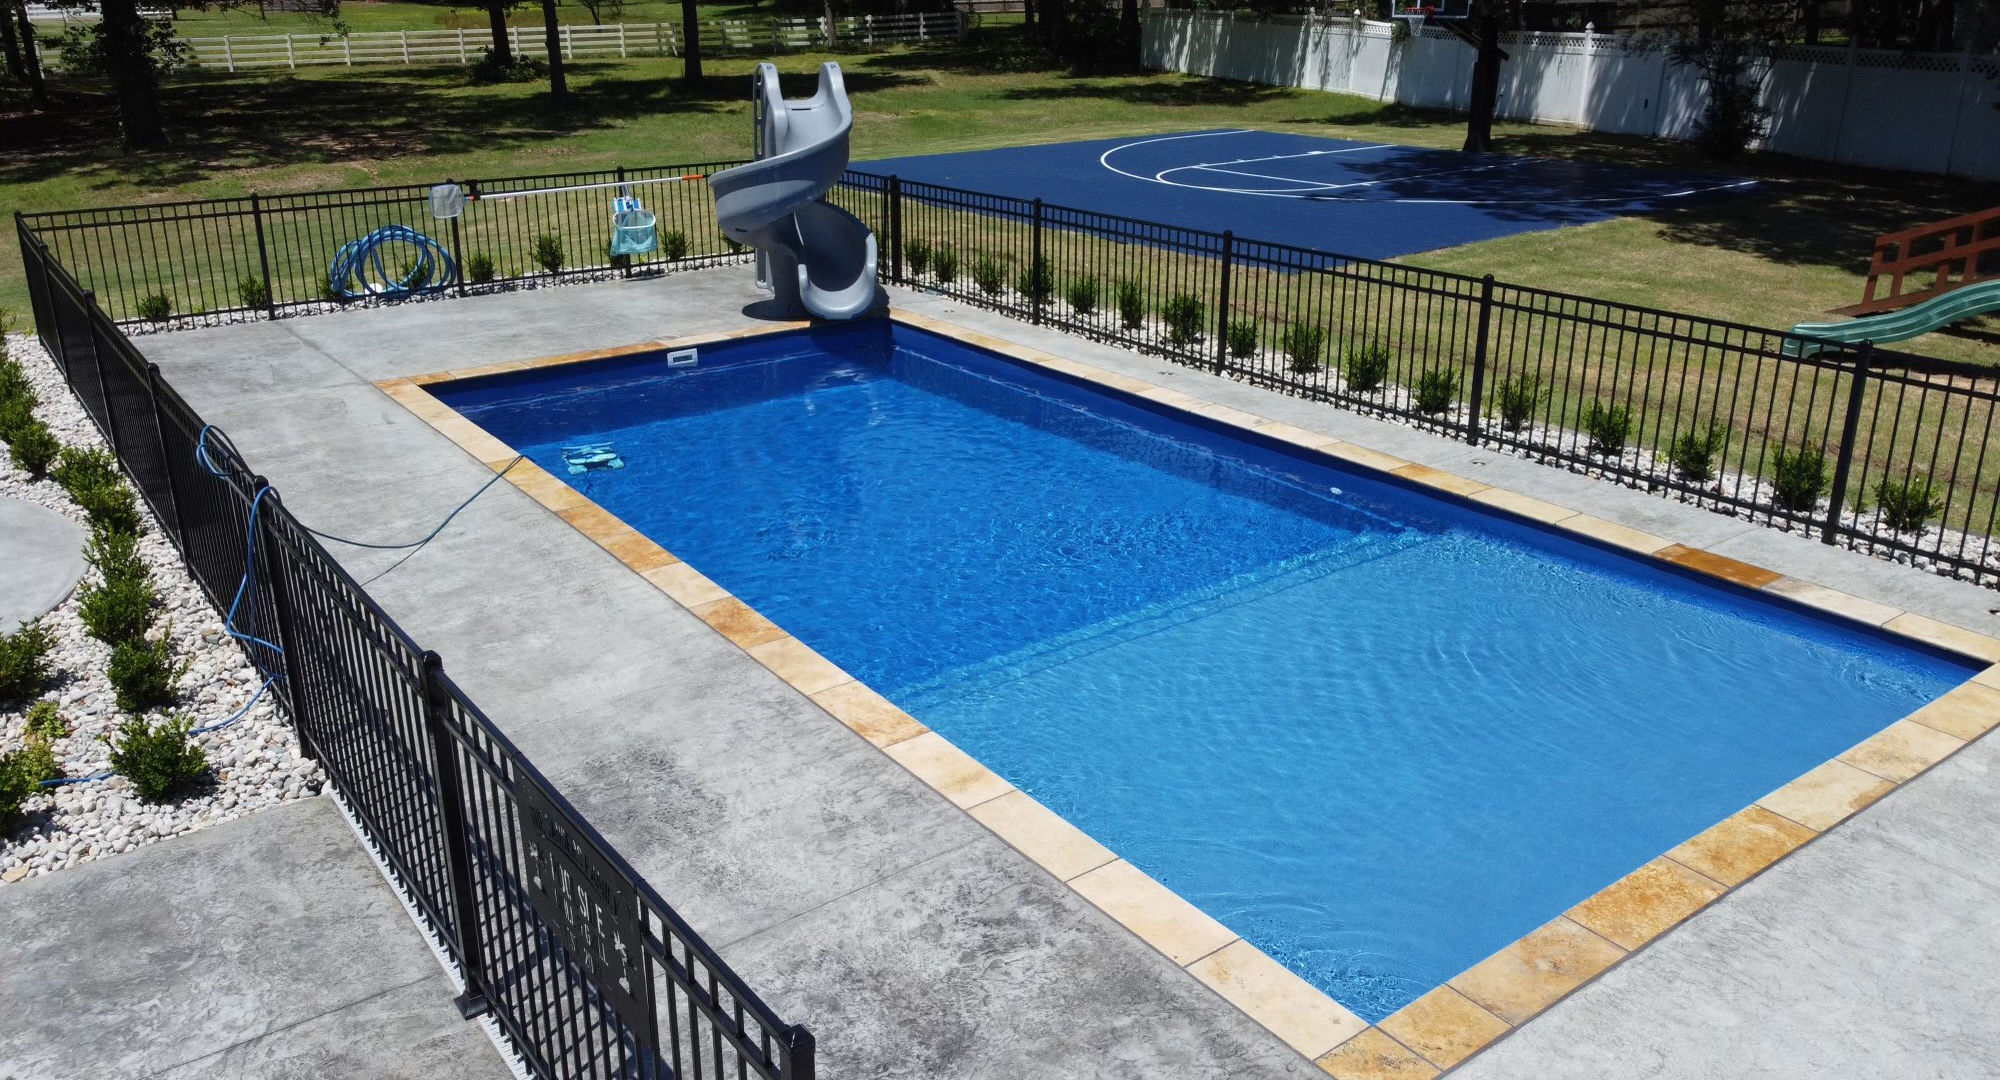 Lonestar Fiberglass Swimming Pools Lockhart Texas for a private backyard oasis and staycation without the hassle of packing to leave